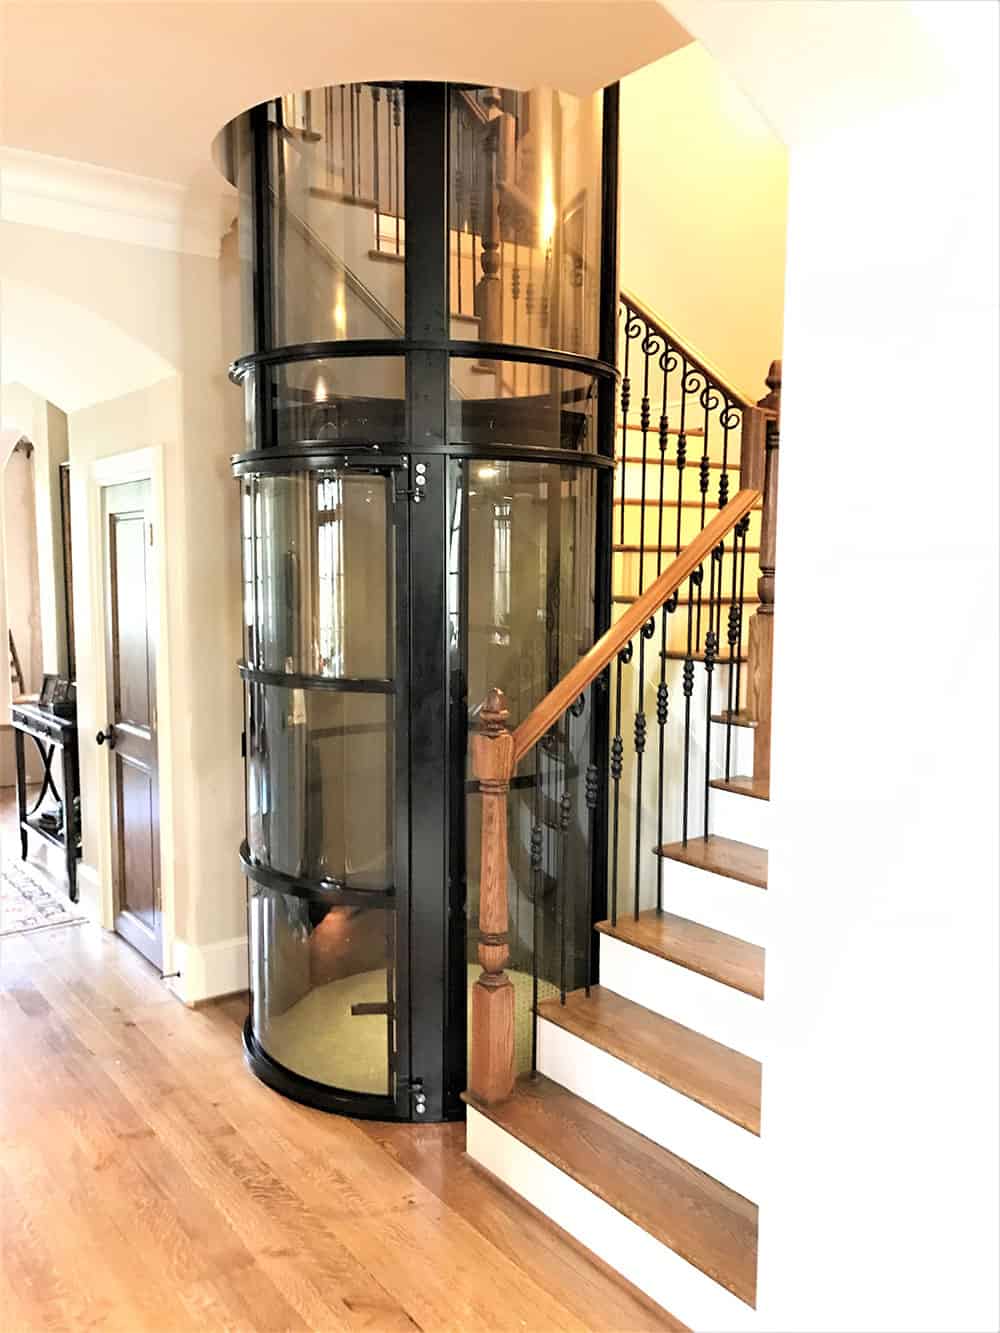 pve elevator installed in stairwell of winding staircase